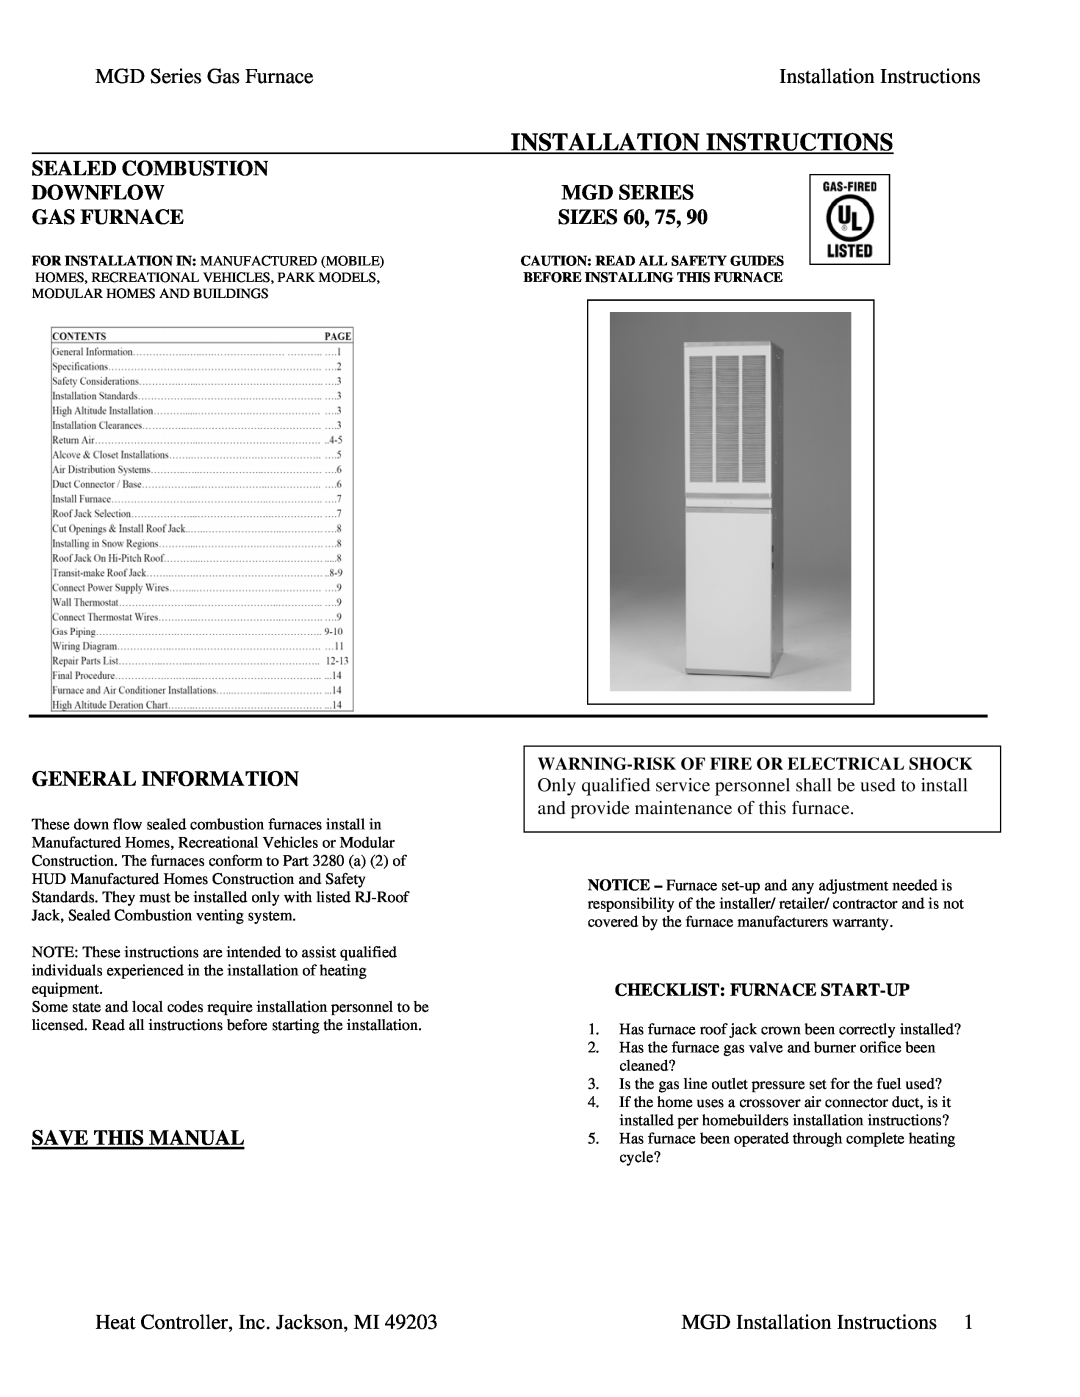 Heat Controller MGD90-E3A installation instructions MGD Series Gas FurnaceInstallation Instructions, Sealed Combustion 